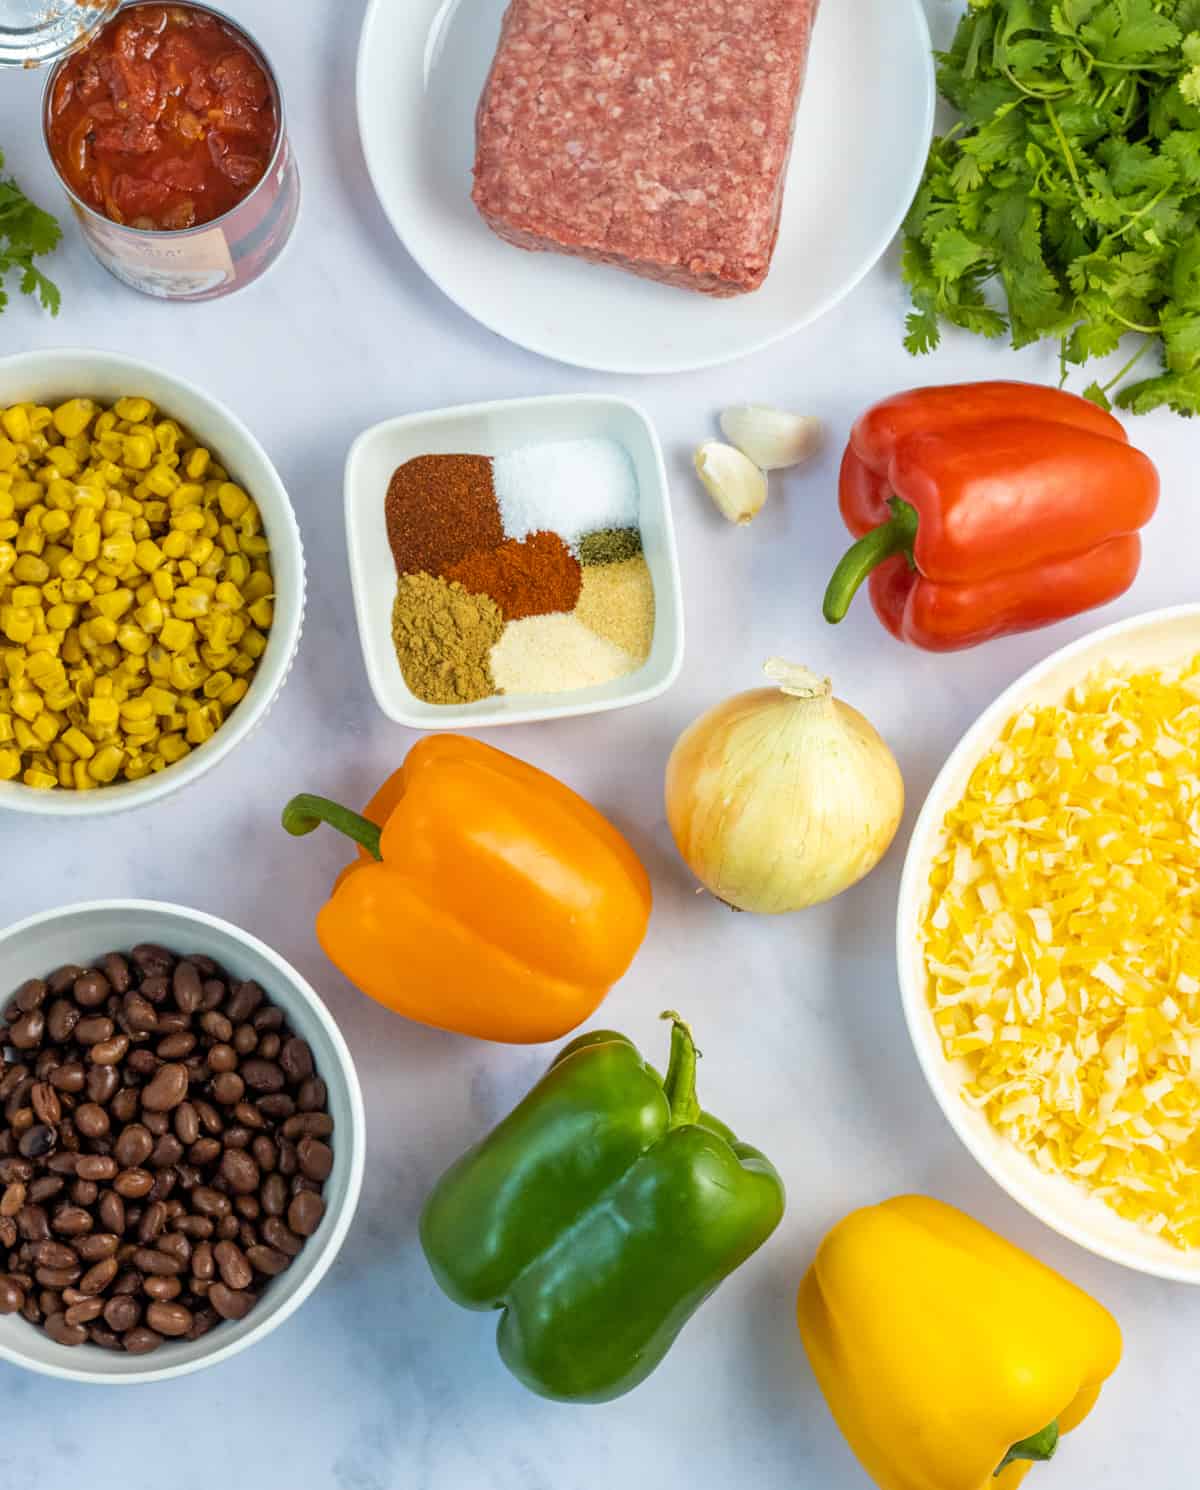 Ingredients for taco stuffed peppers.